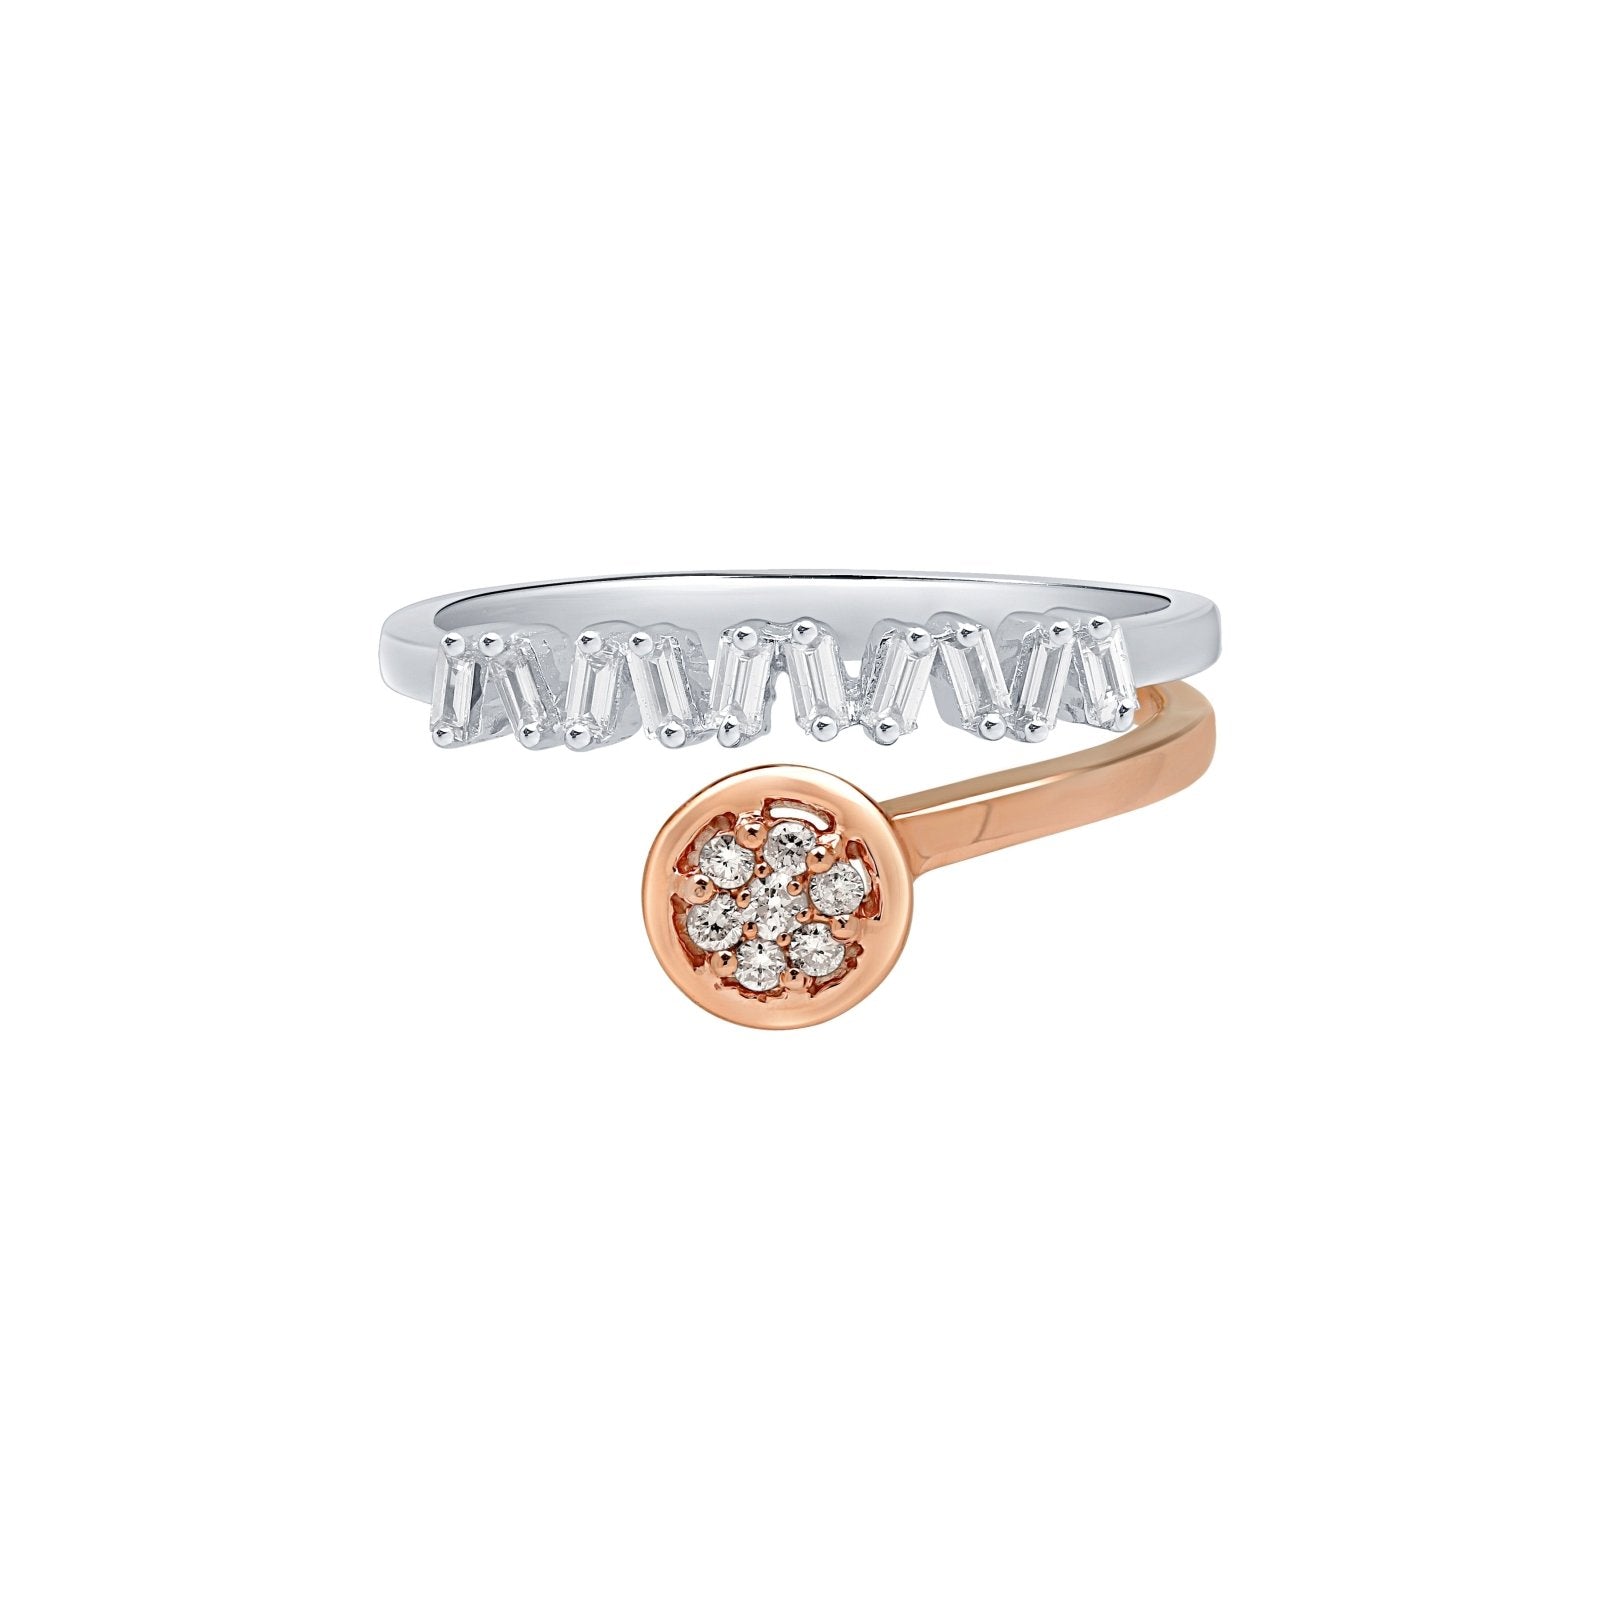 Mixed Shape Diamond Ring in Solid 18k Two-Tone White and Rose Gold Rings Estella Collection #product_description# 17491 14k Diamond Engagement Ring #tag4# #tag5# #tag6# #tag7# #tag8# #tag9# #tag10# 6